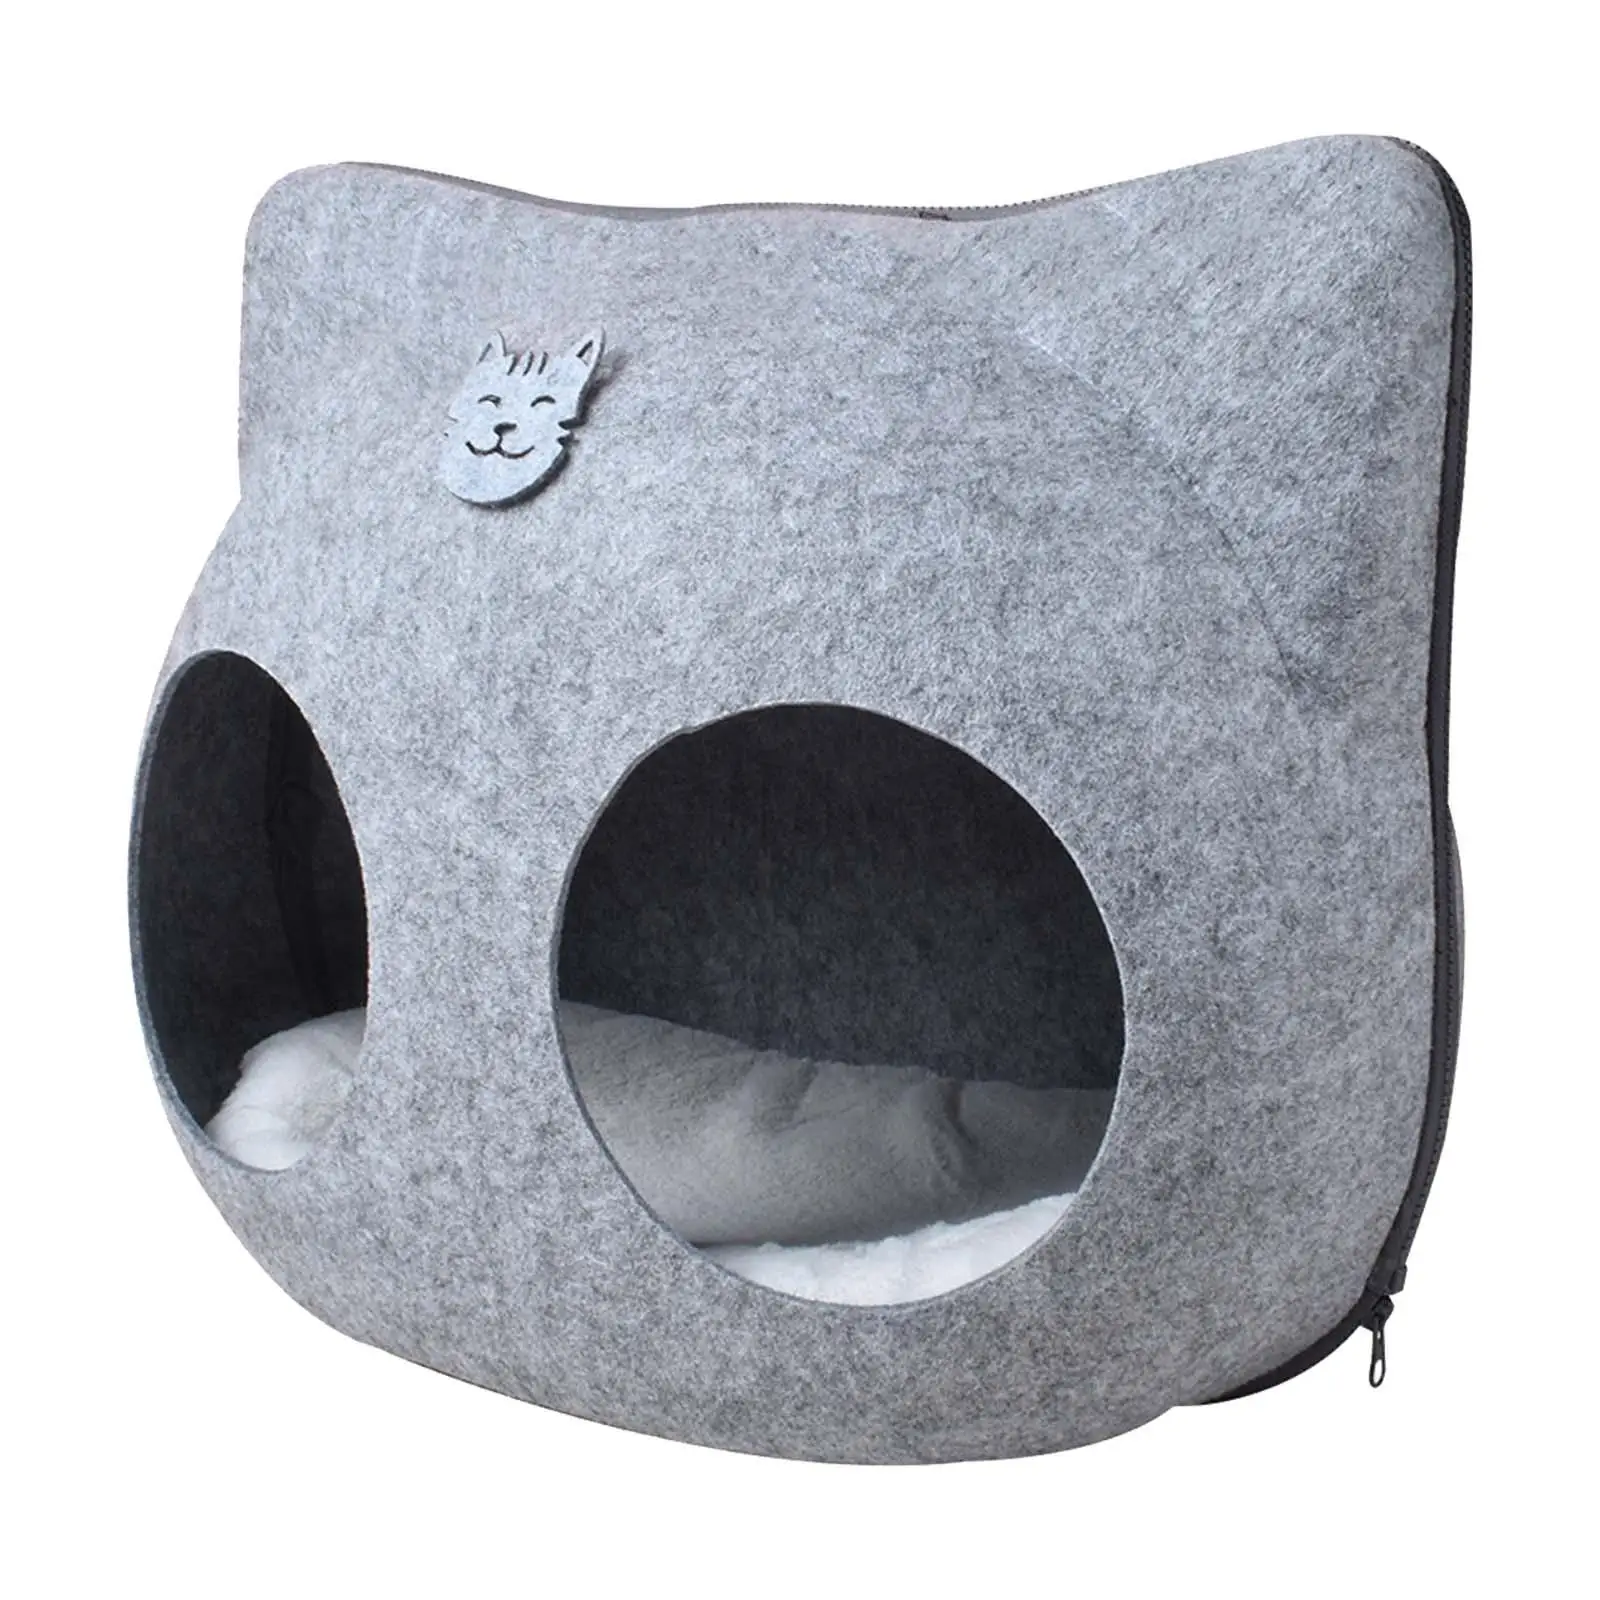 Bed Large Enclosed Cat Bed Felt Cat Bed Cave Sleeping Bed for Kittens or Small Dogs